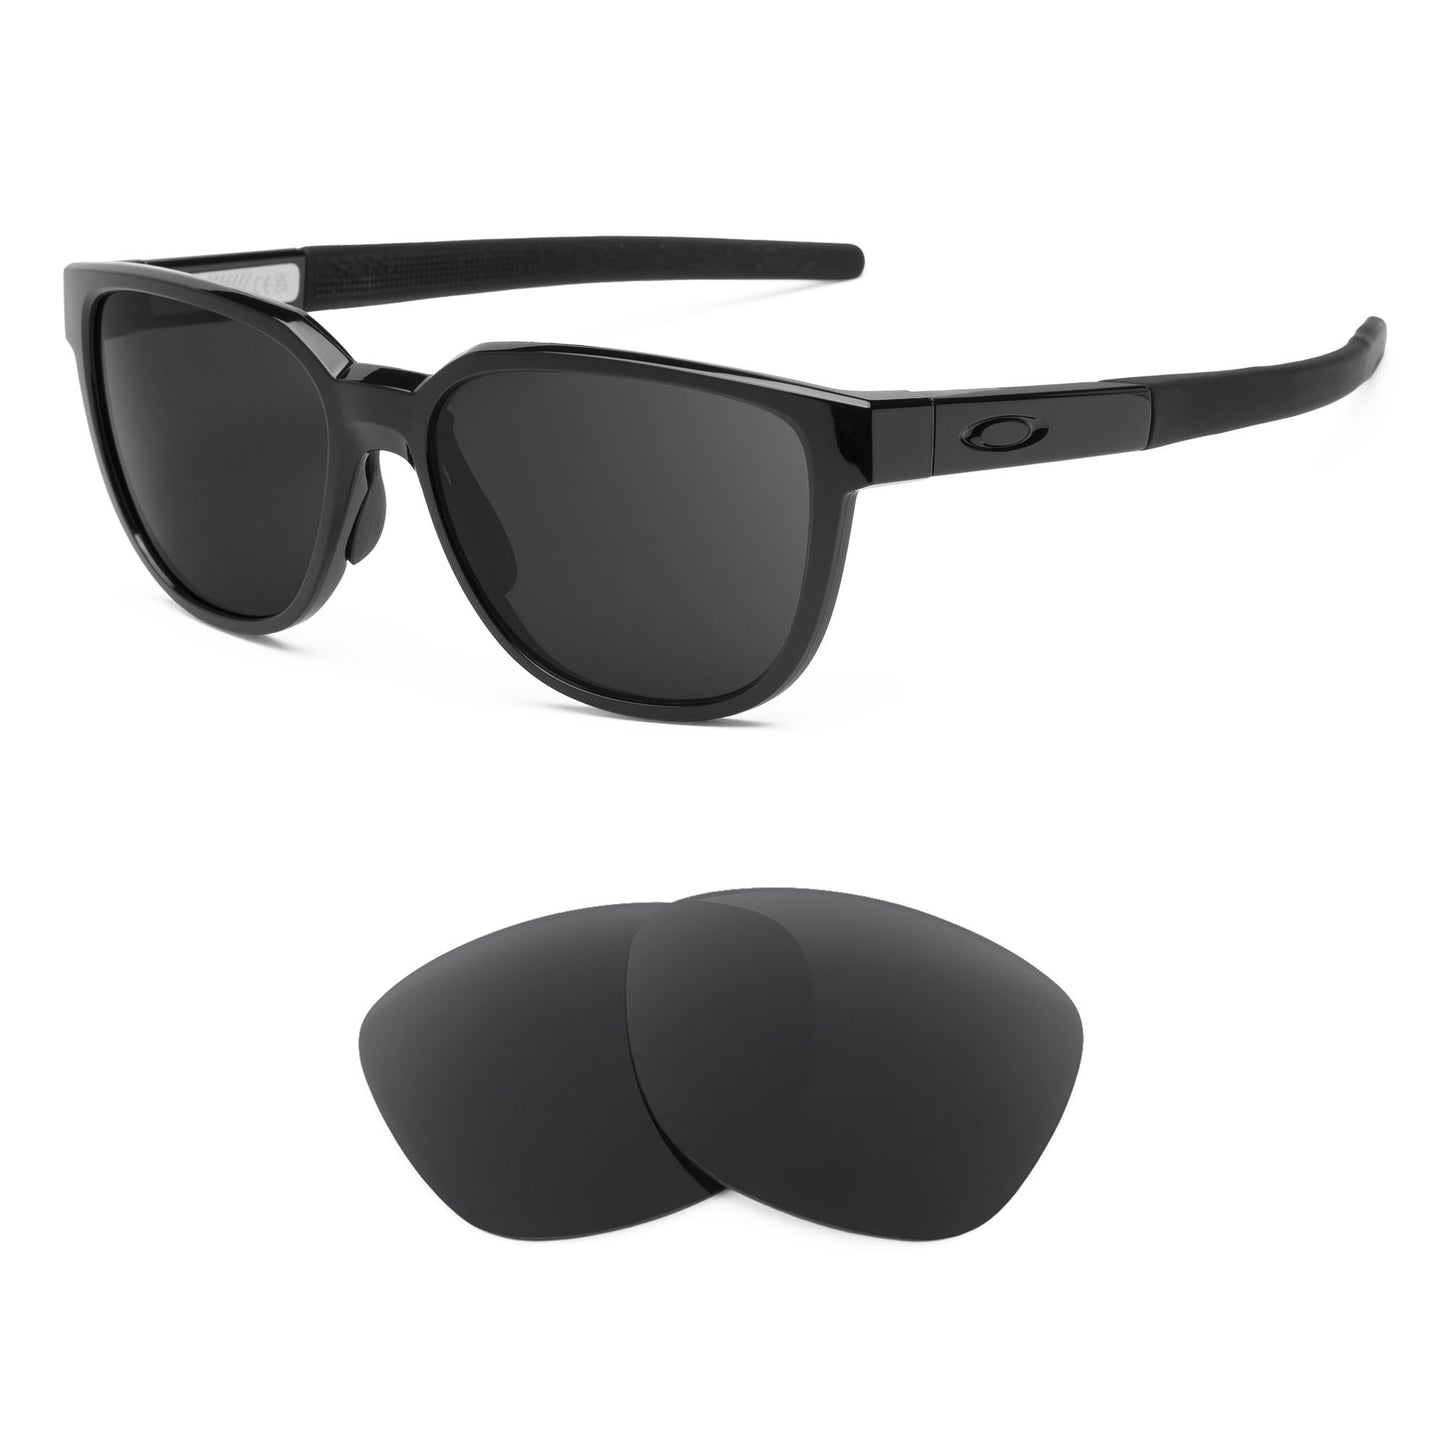 Oakley Actuator sunglasses with replacement lenses